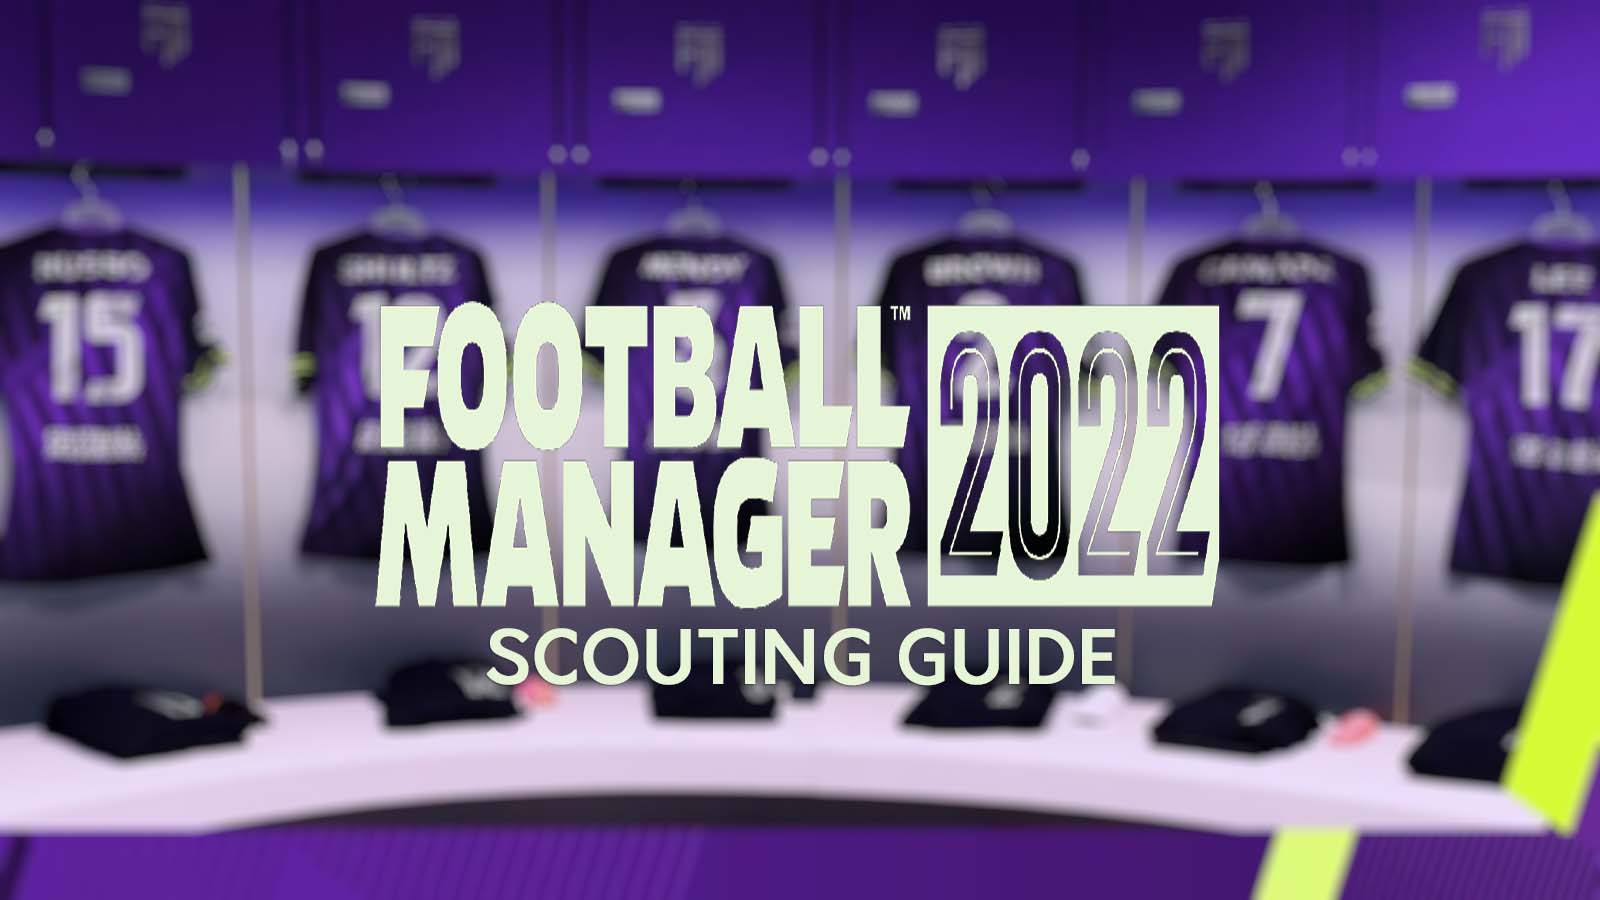 Football manager 2022 scouting guide